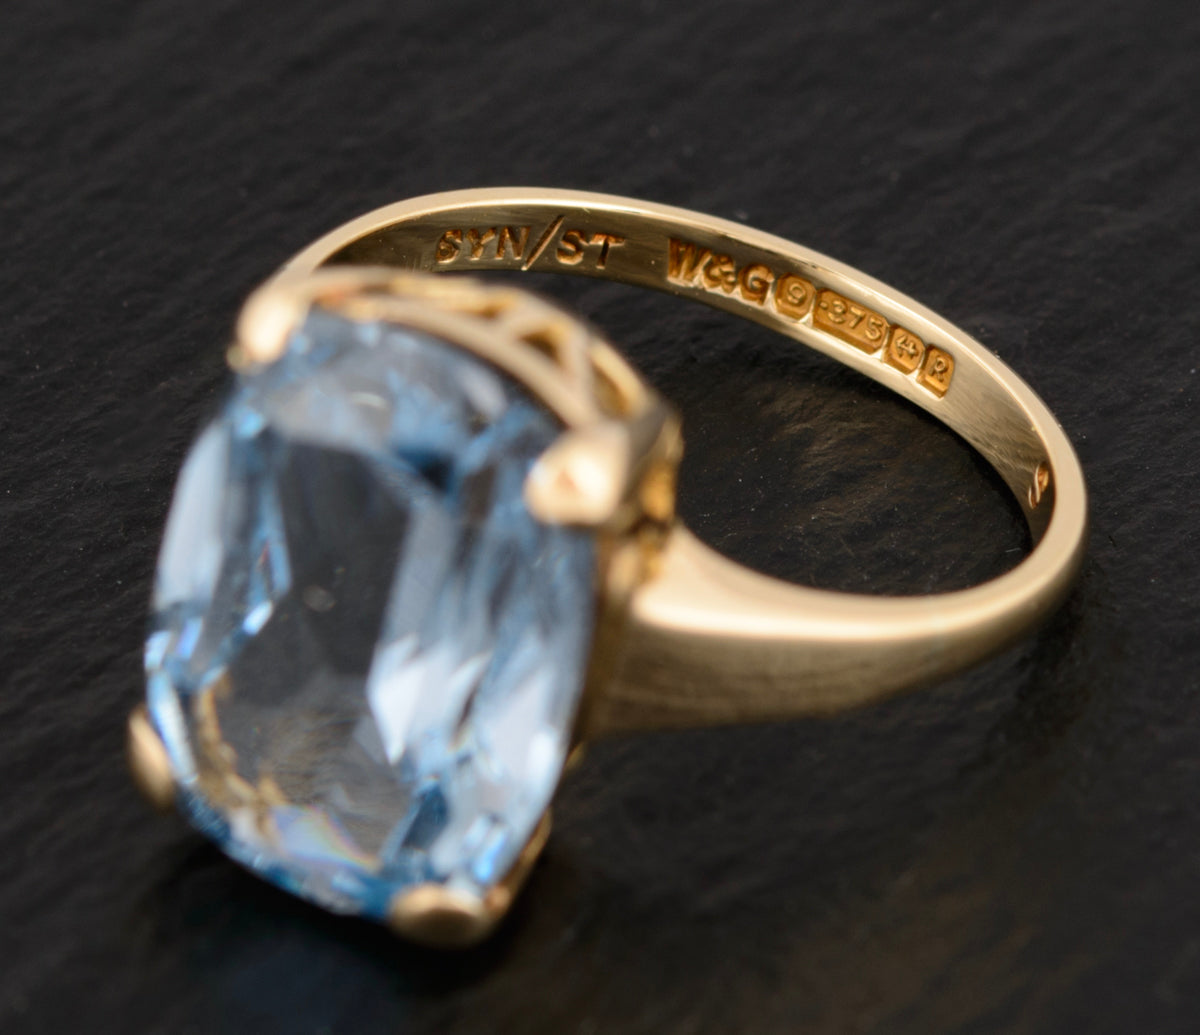 Vintage 9ct Gold Dress Ring With Light Blue Lab-Created Spinel Gemstone 1960's (A1508)